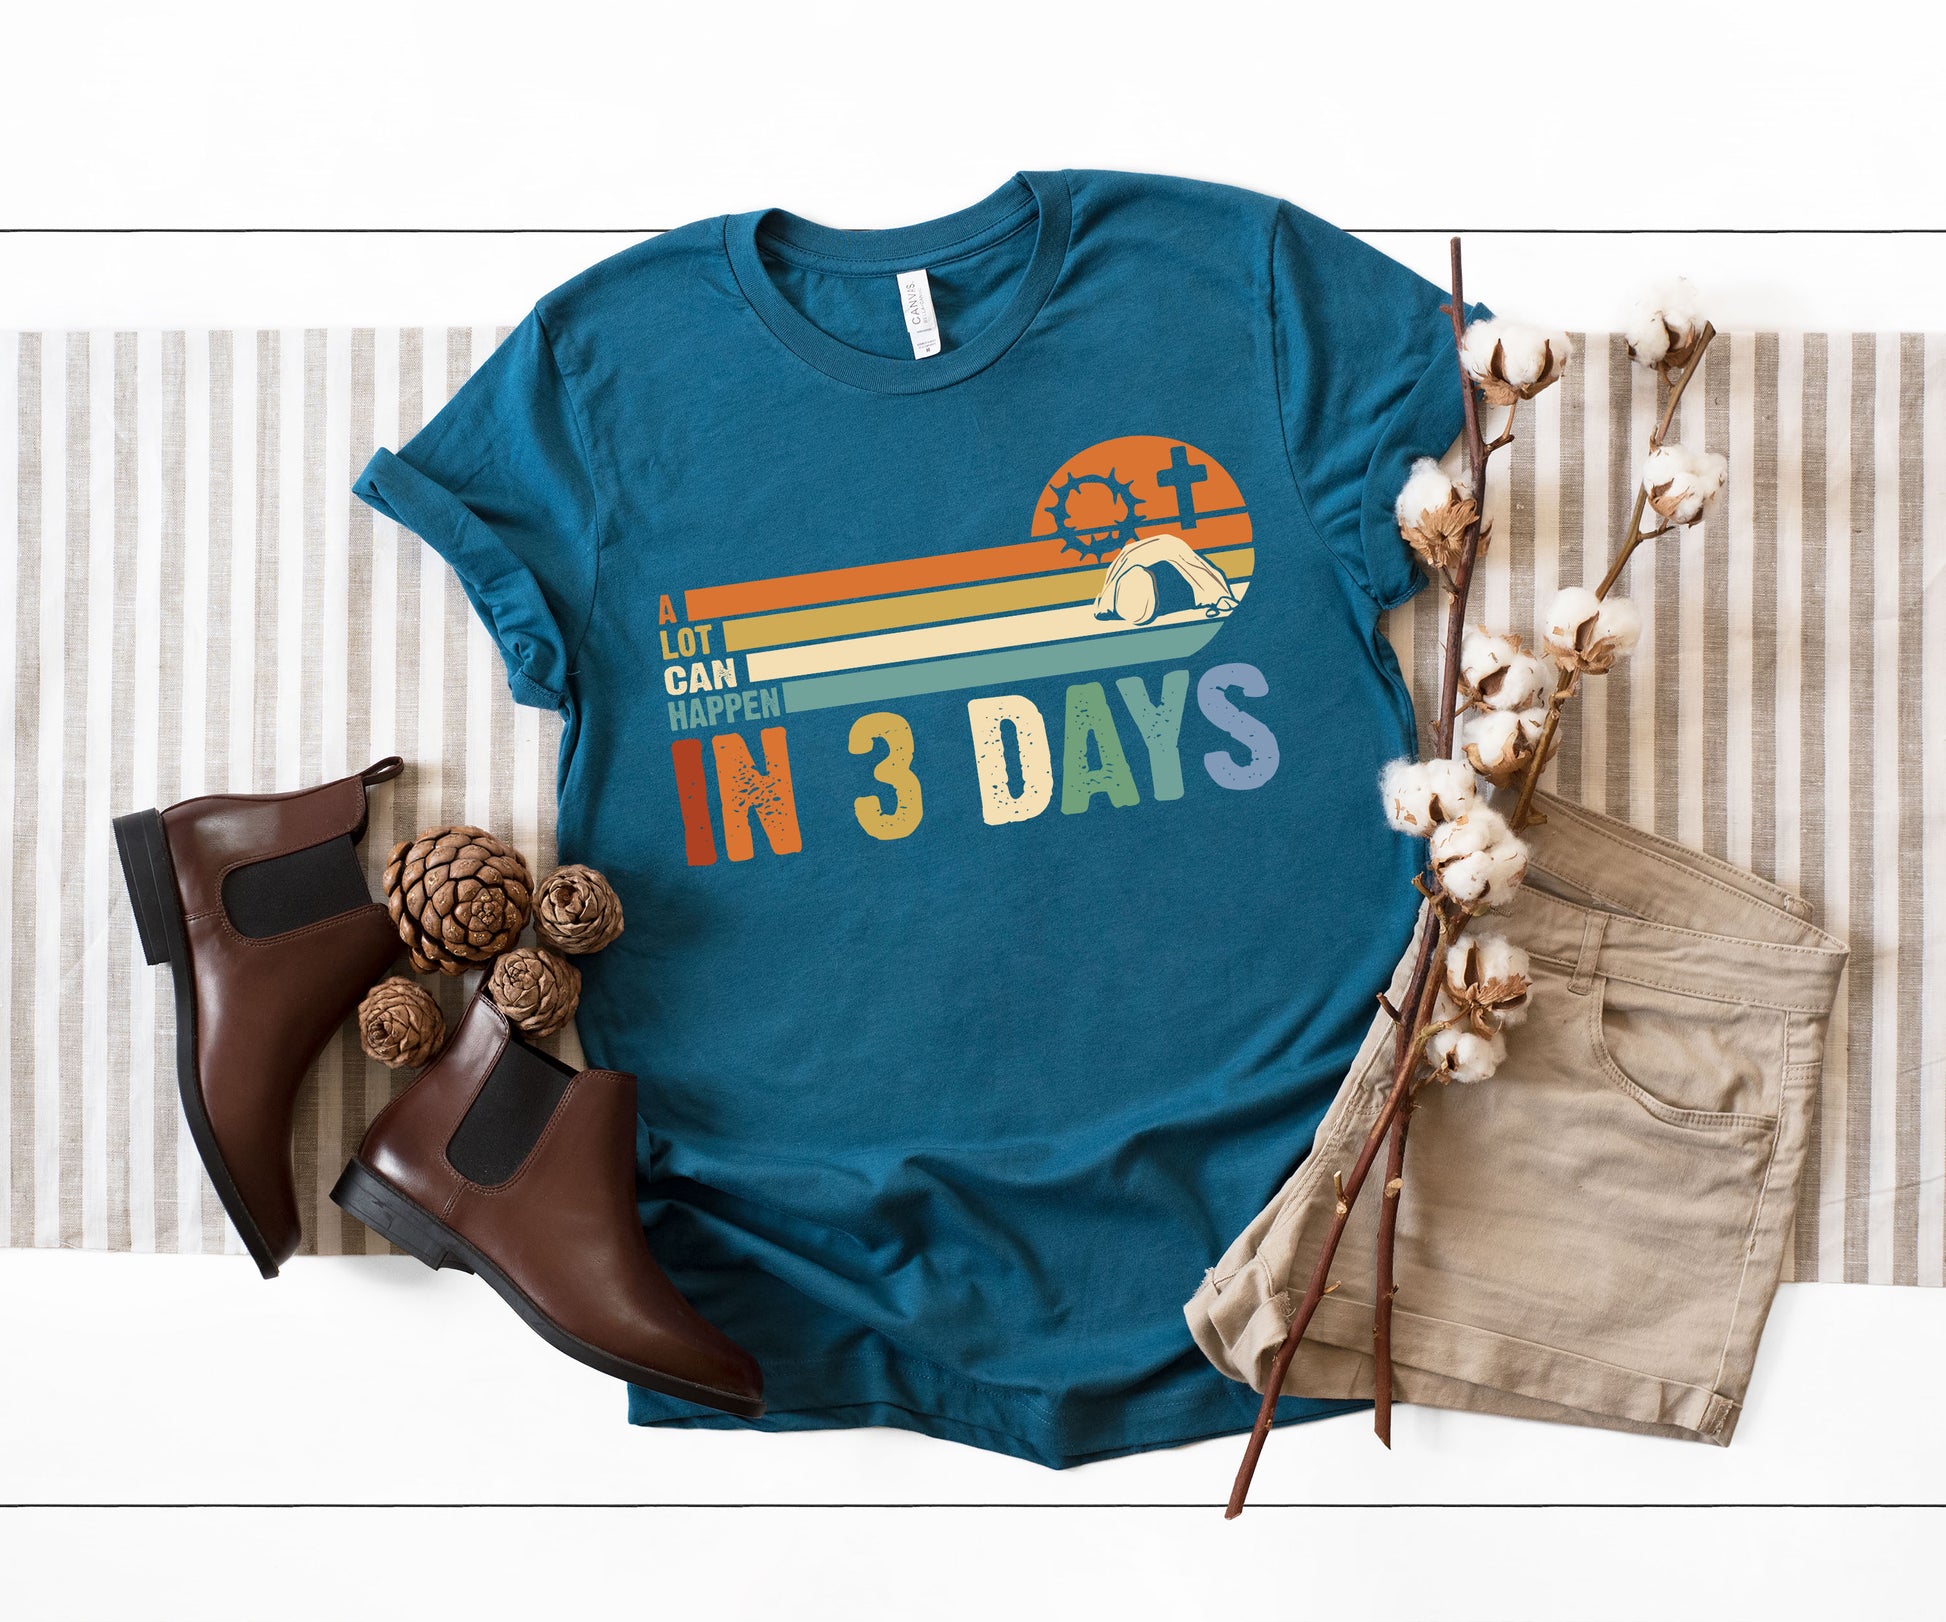 A Lot Can Happen In 3 Days Shirt, Happy Easter Shirt, In 3 Days Shirt-newamarketing